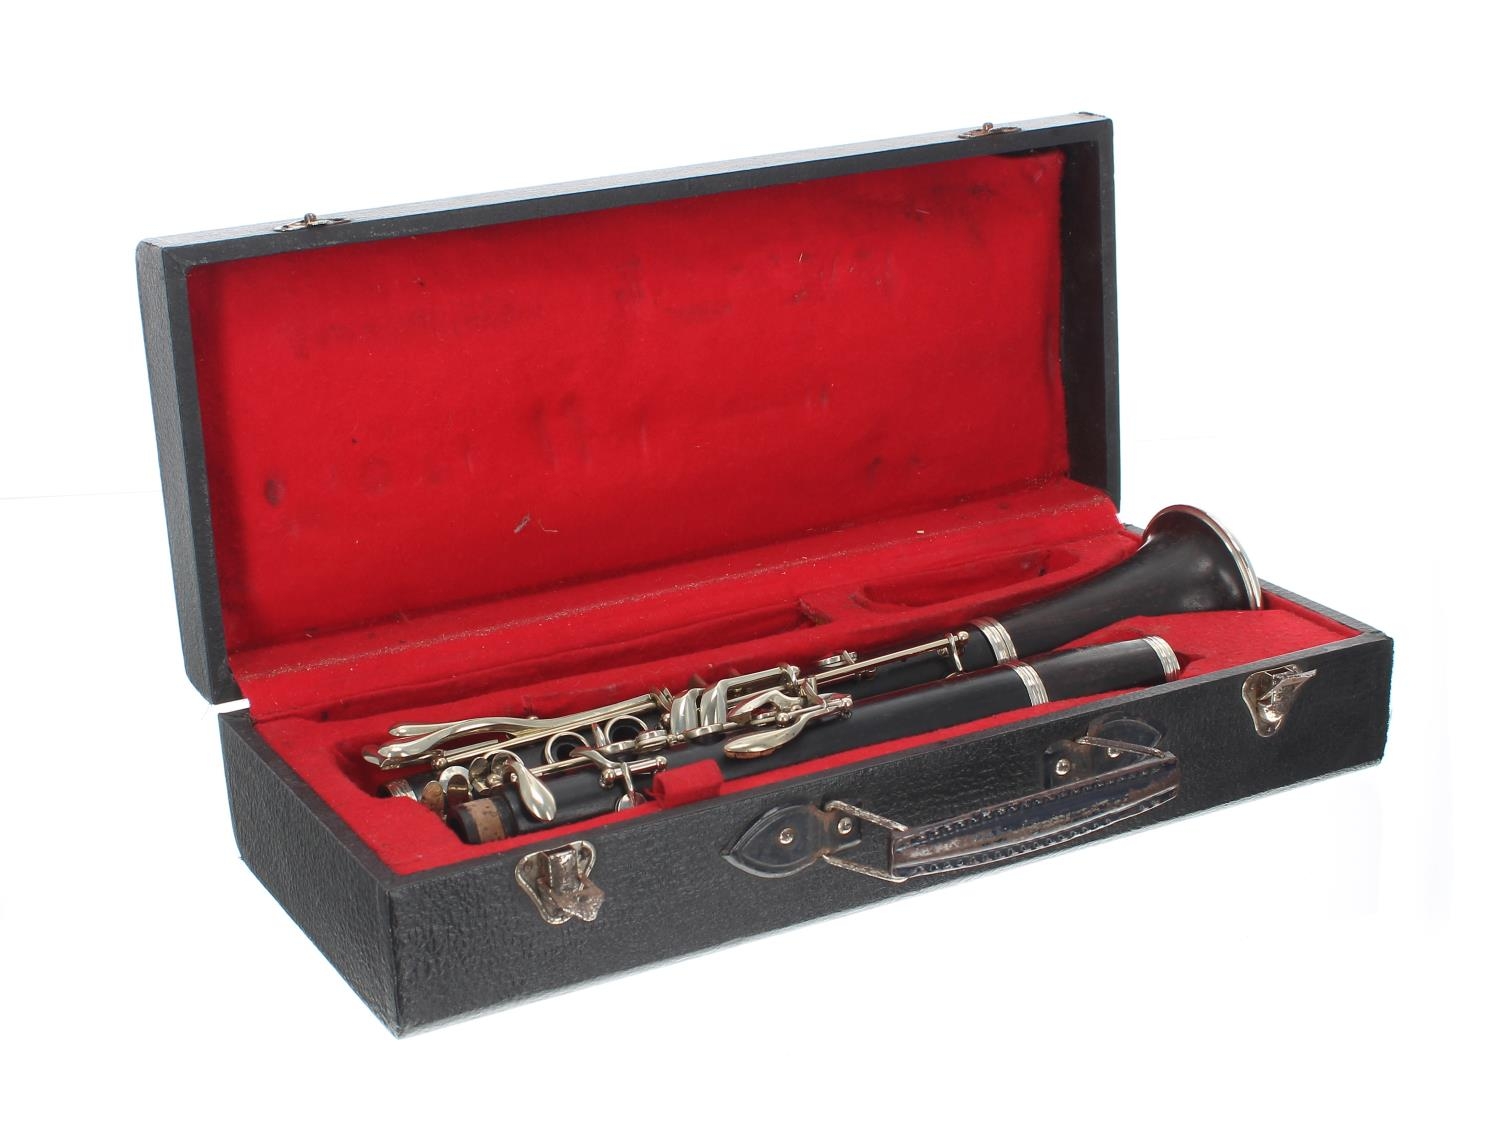 Old blackwood clarinet by and stamped Orsi, Milan, case - Image 2 of 2